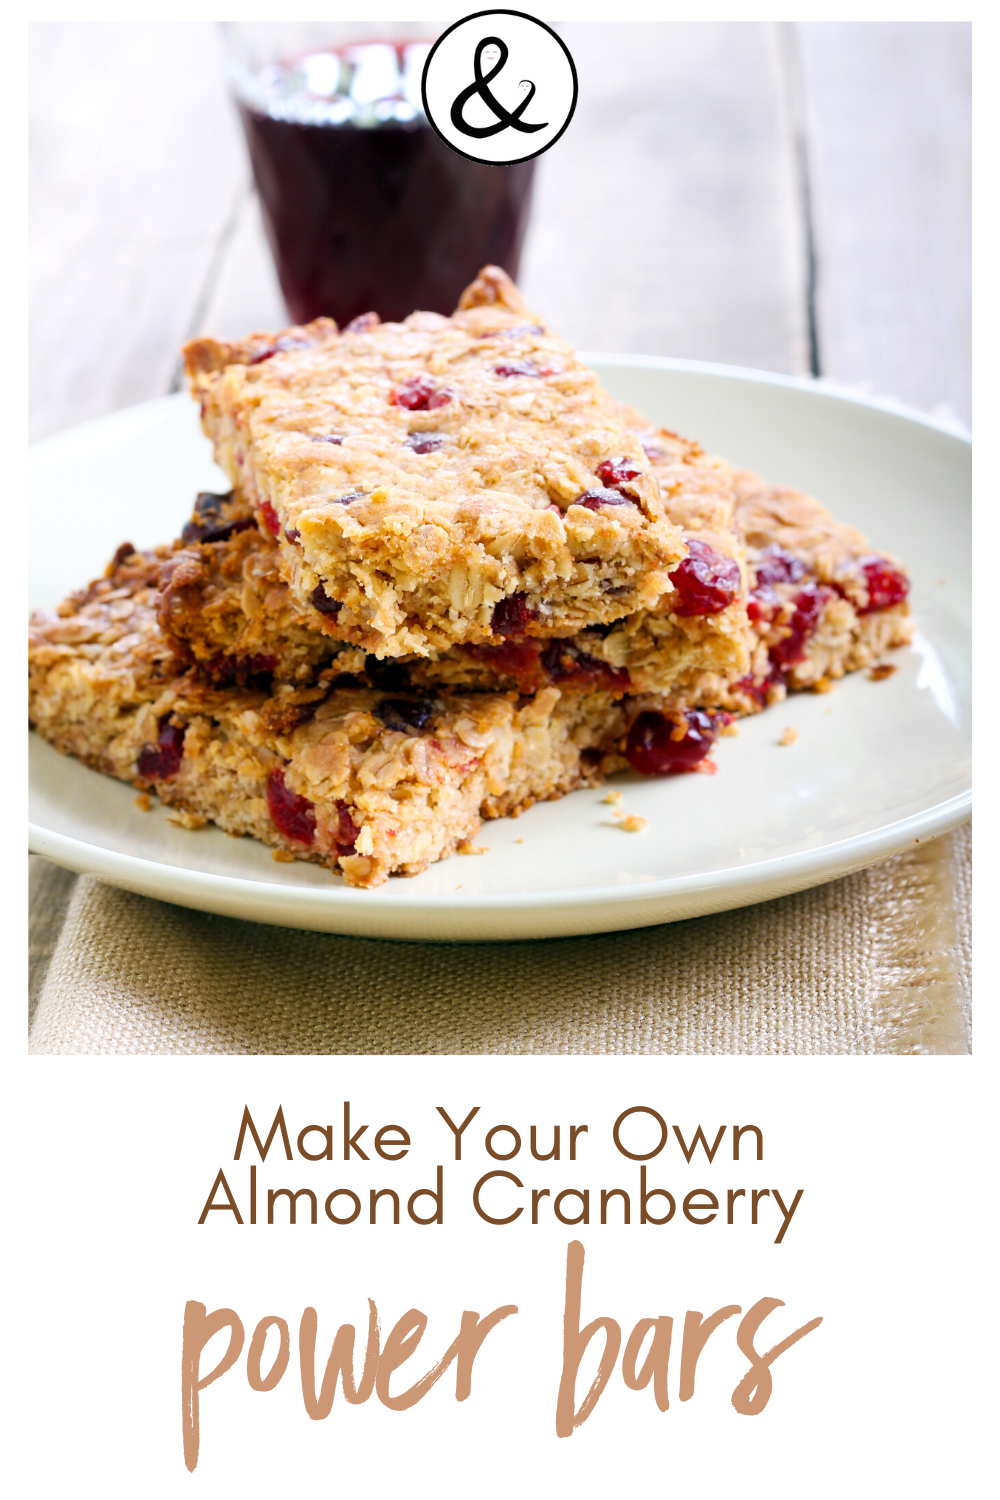 Make Your Own Almond Cranberry Power Bars